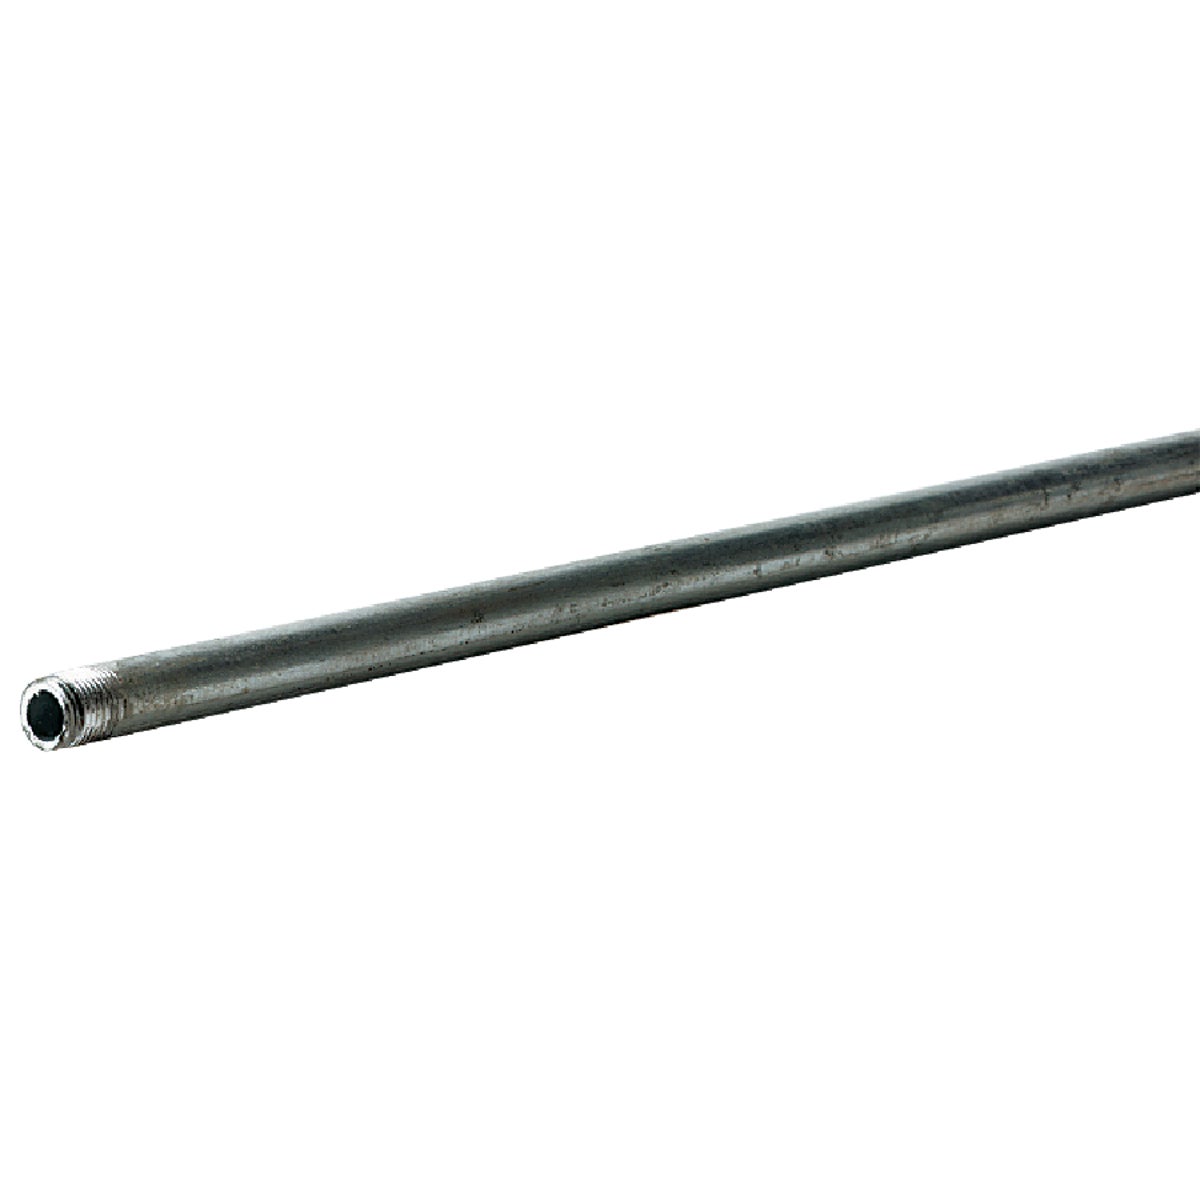 Item 437085, Southland threaded and coupled galvanized pipe. Schedule 40.